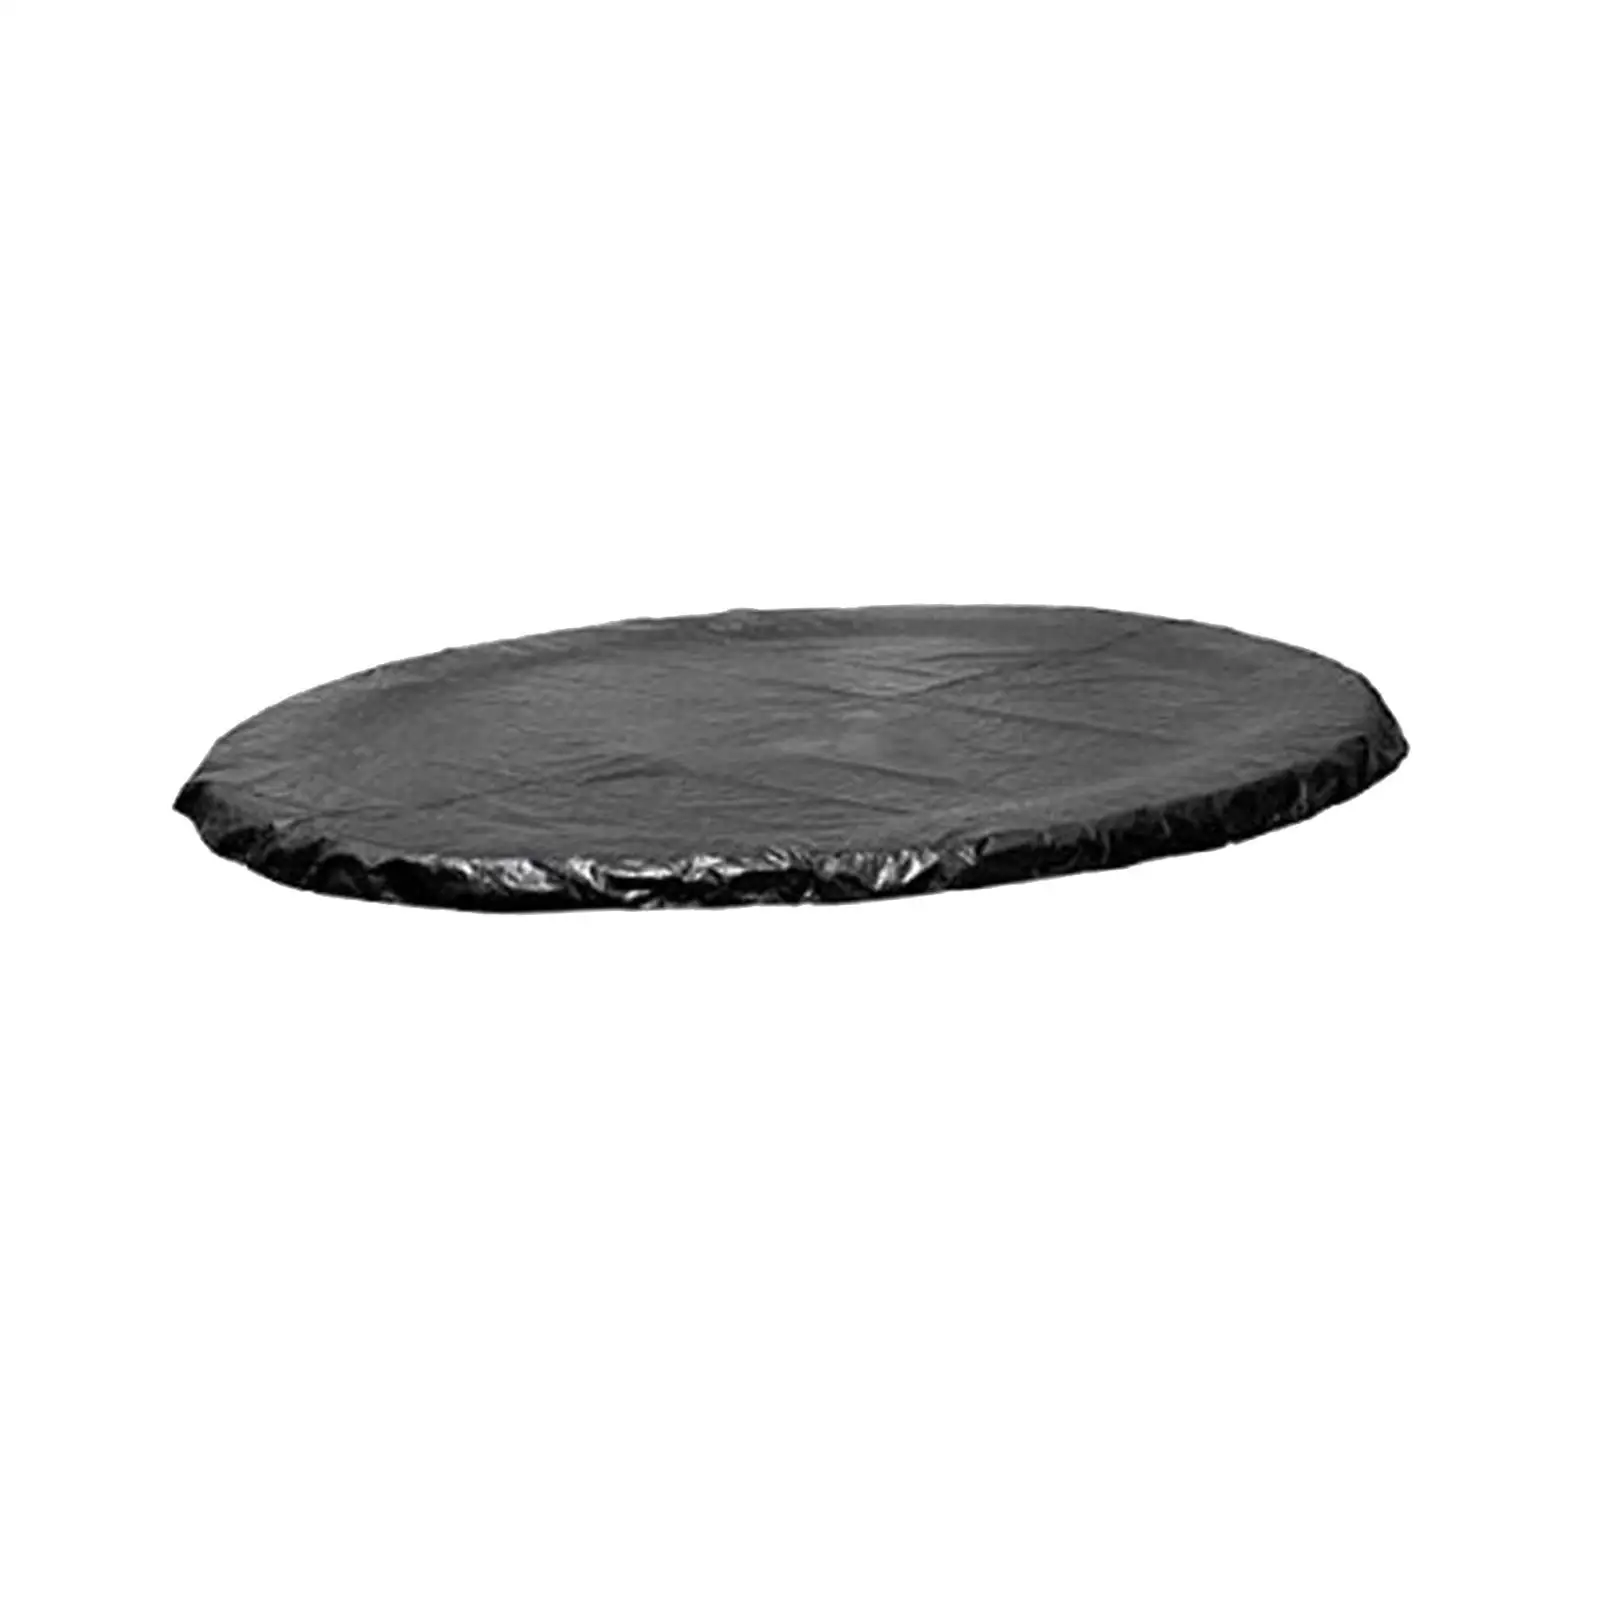 Trampoline Protective Cover Windproof Weather and Rain Cover Multifunctional All Season Use Accessories Dustproof Round